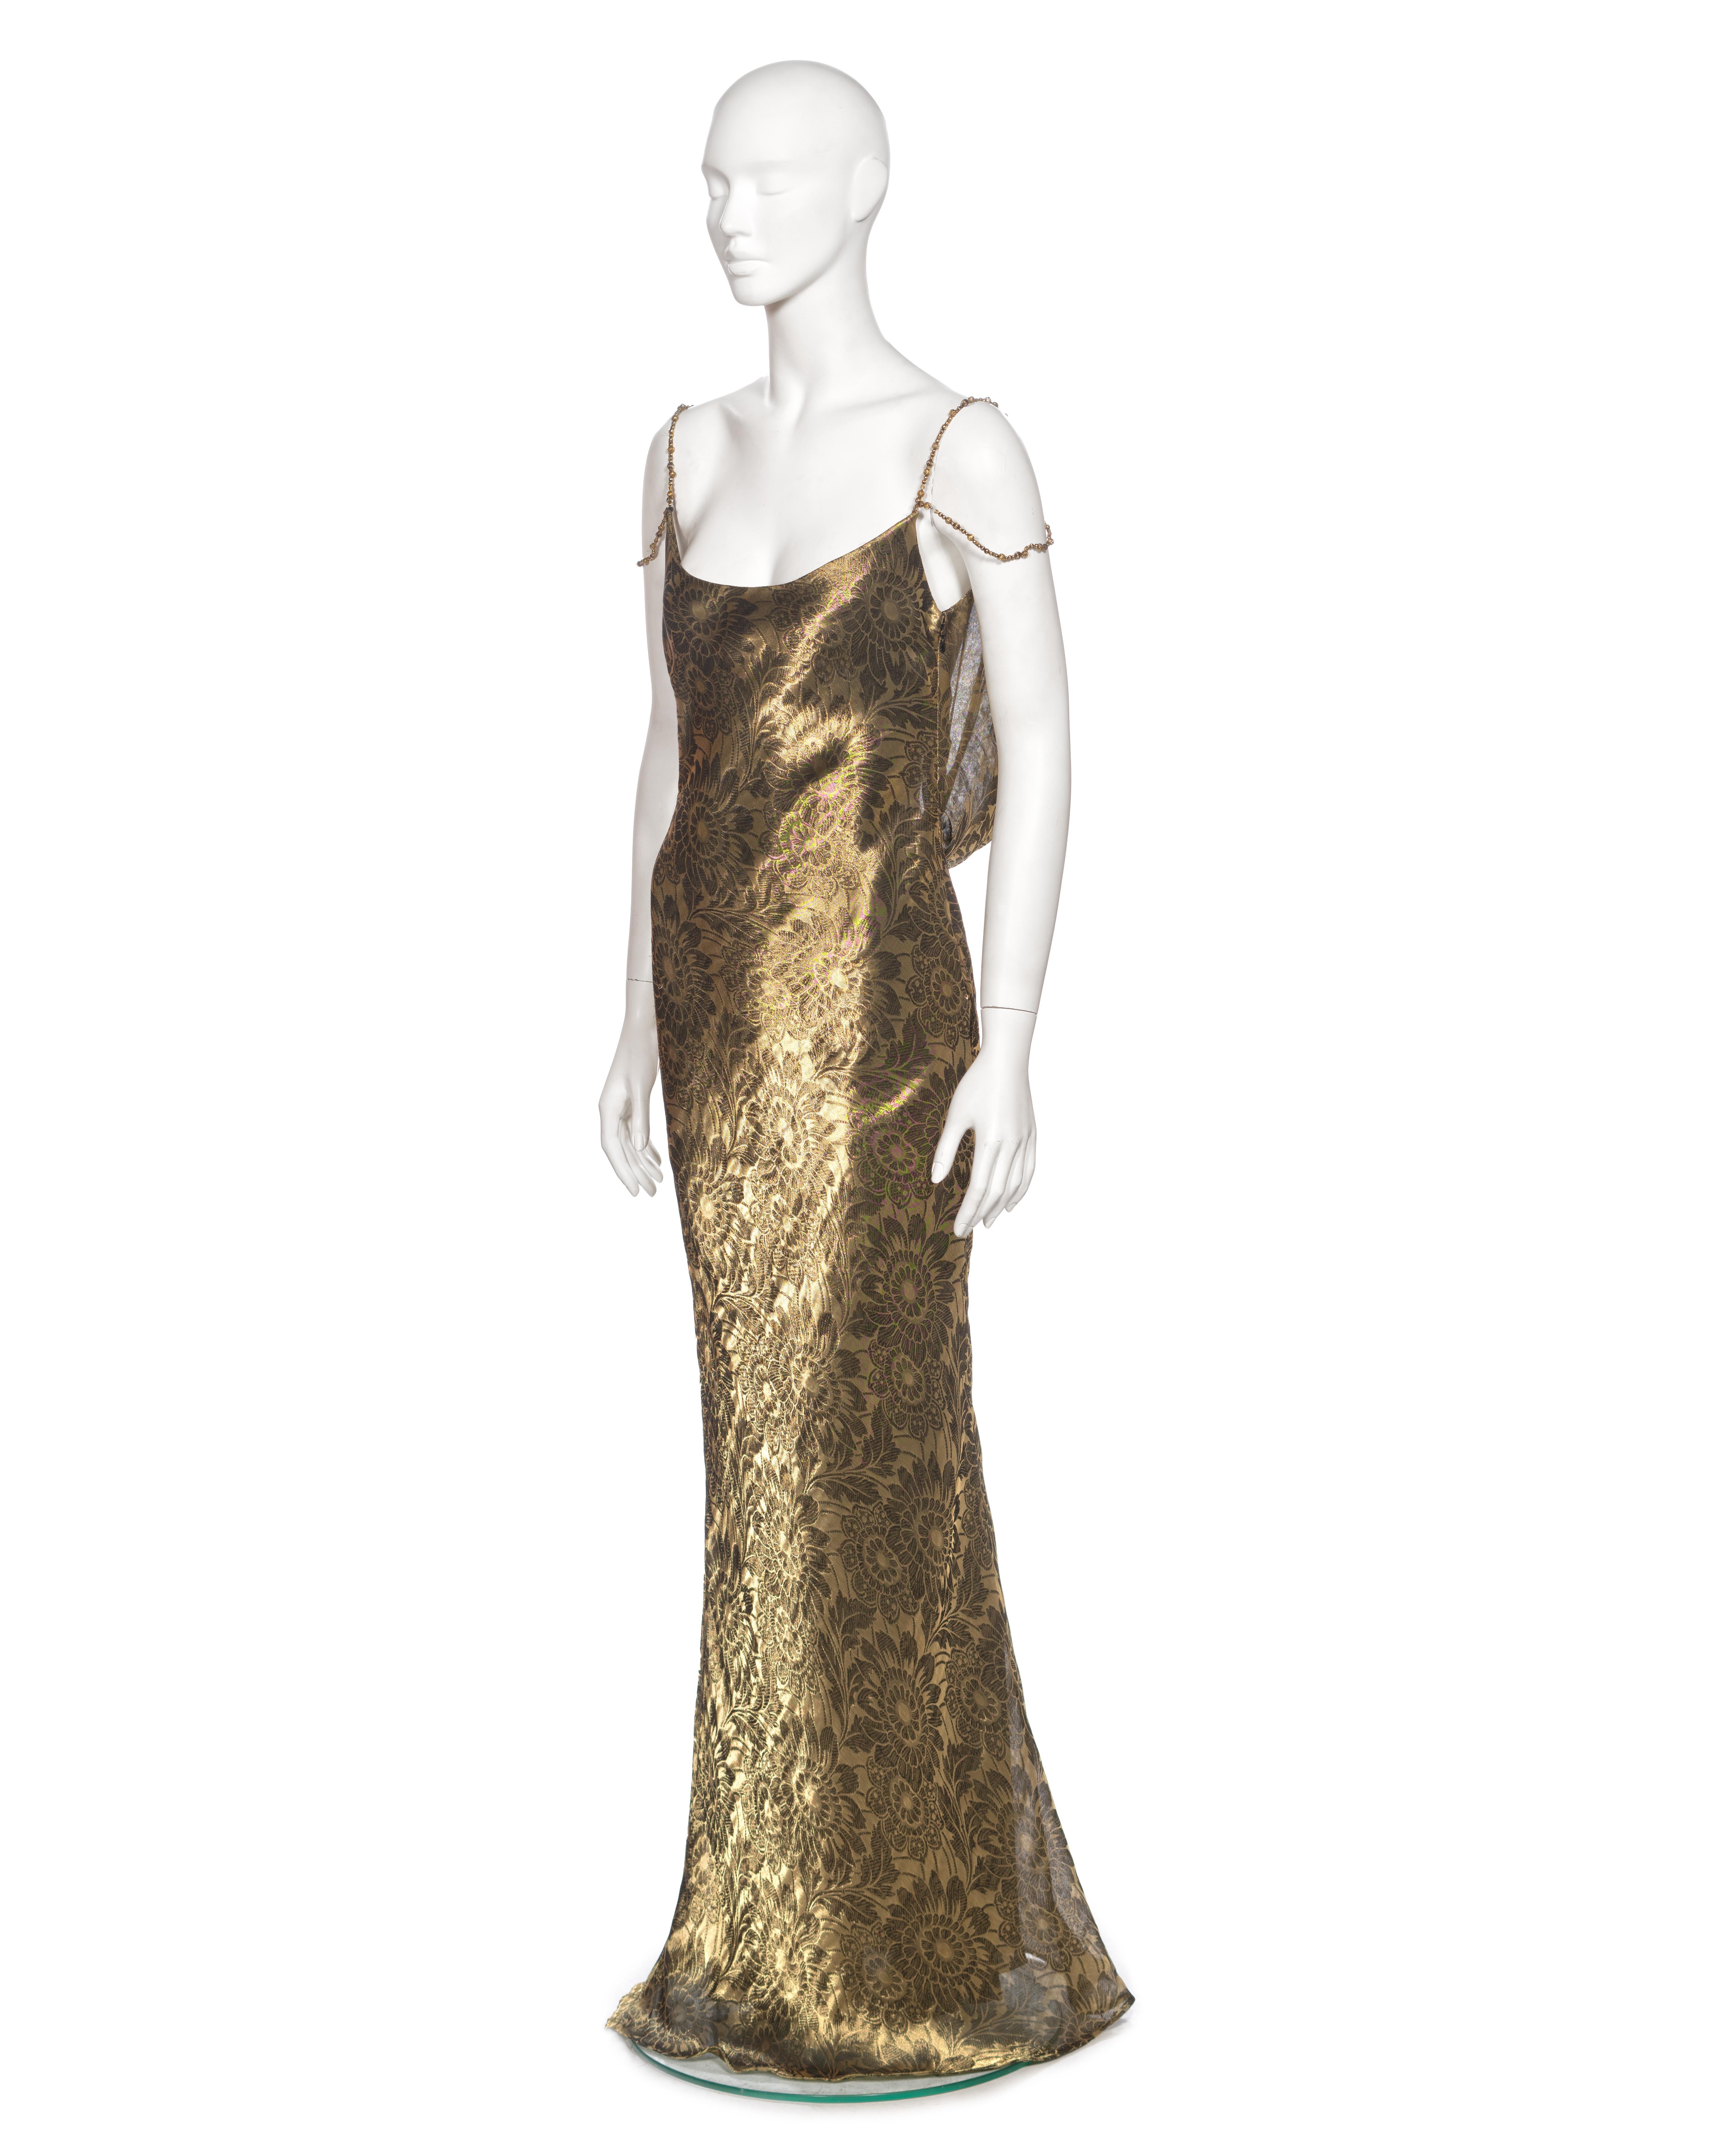 Christian Dior by John Galliano Metallic Antique Gold Evening Dress, FW 1998 For Sale 3